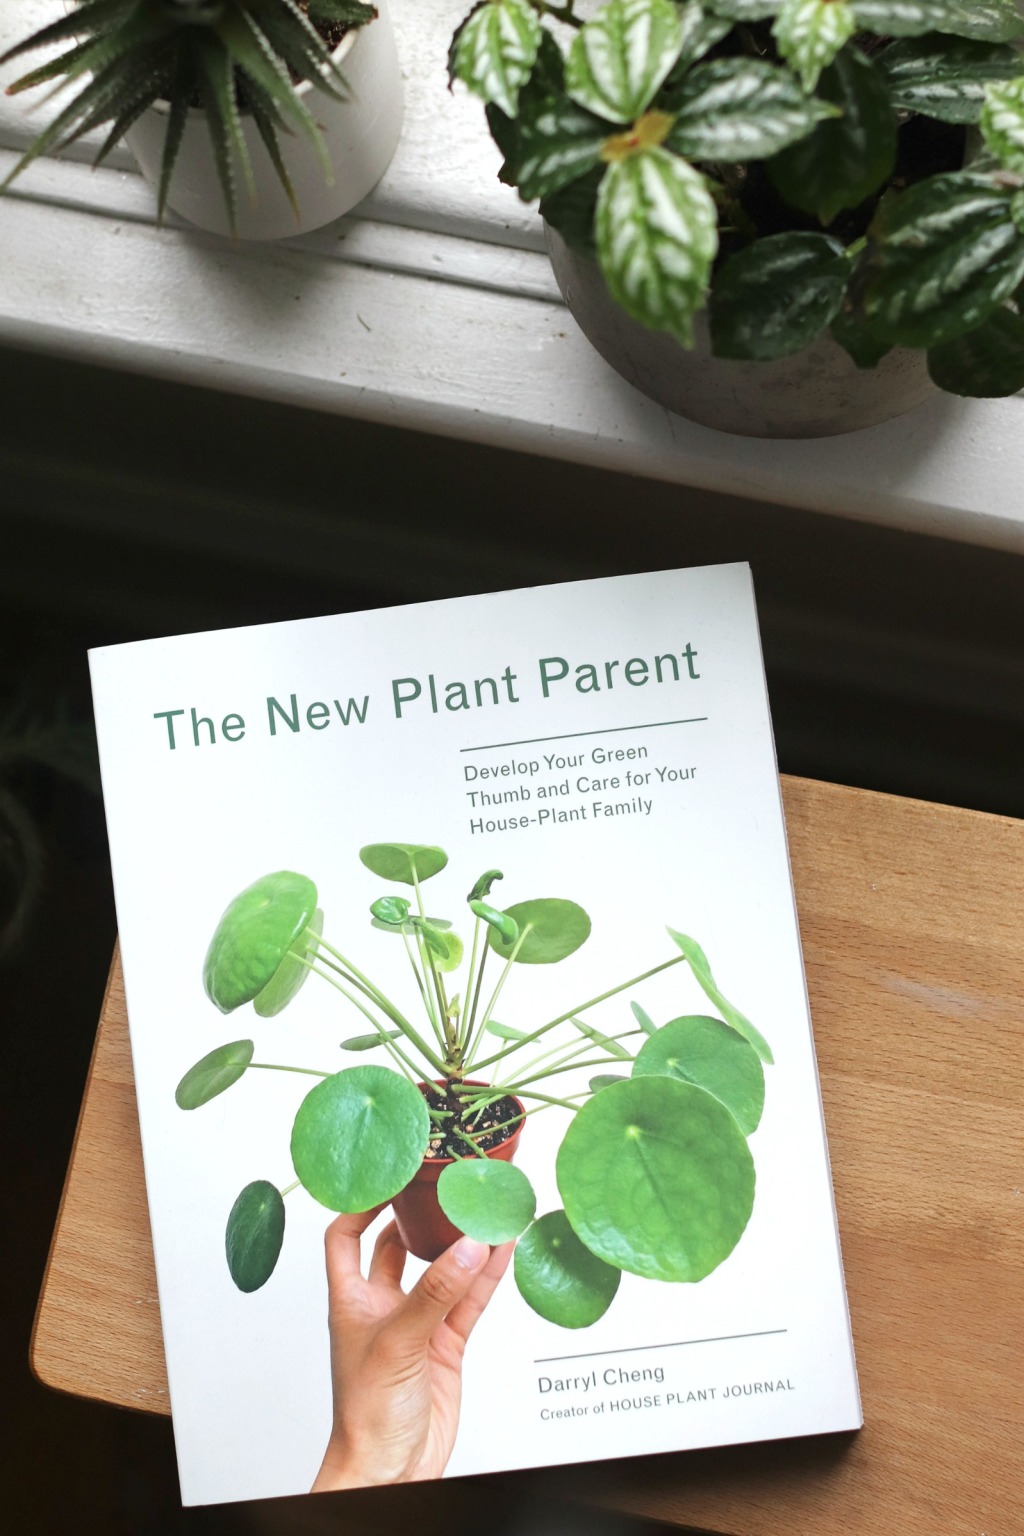 The New Plant Parent: Develop Your Green Thumb and Care for Your House-Plant Family + Win a copy!